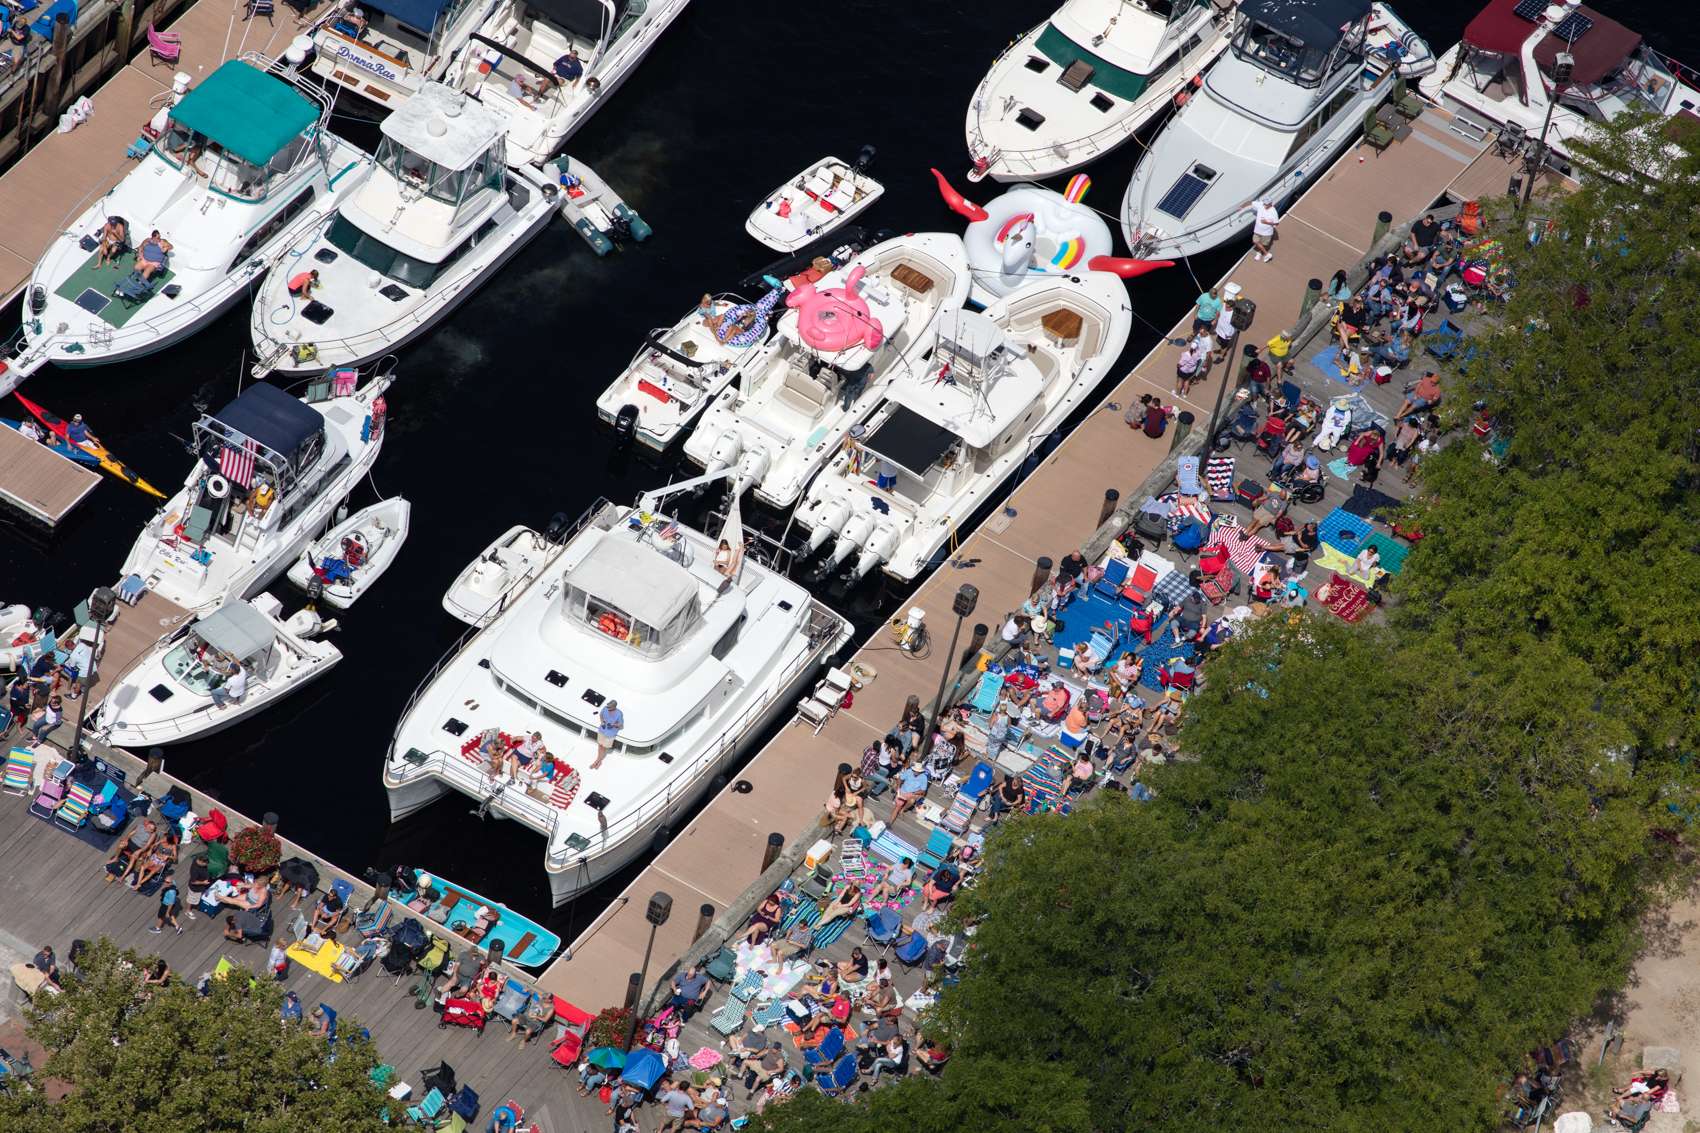 Luxury yachts and high power speed boats with multiple outboard engines rafted together at a music festival in Newburyport, Massachusetts.